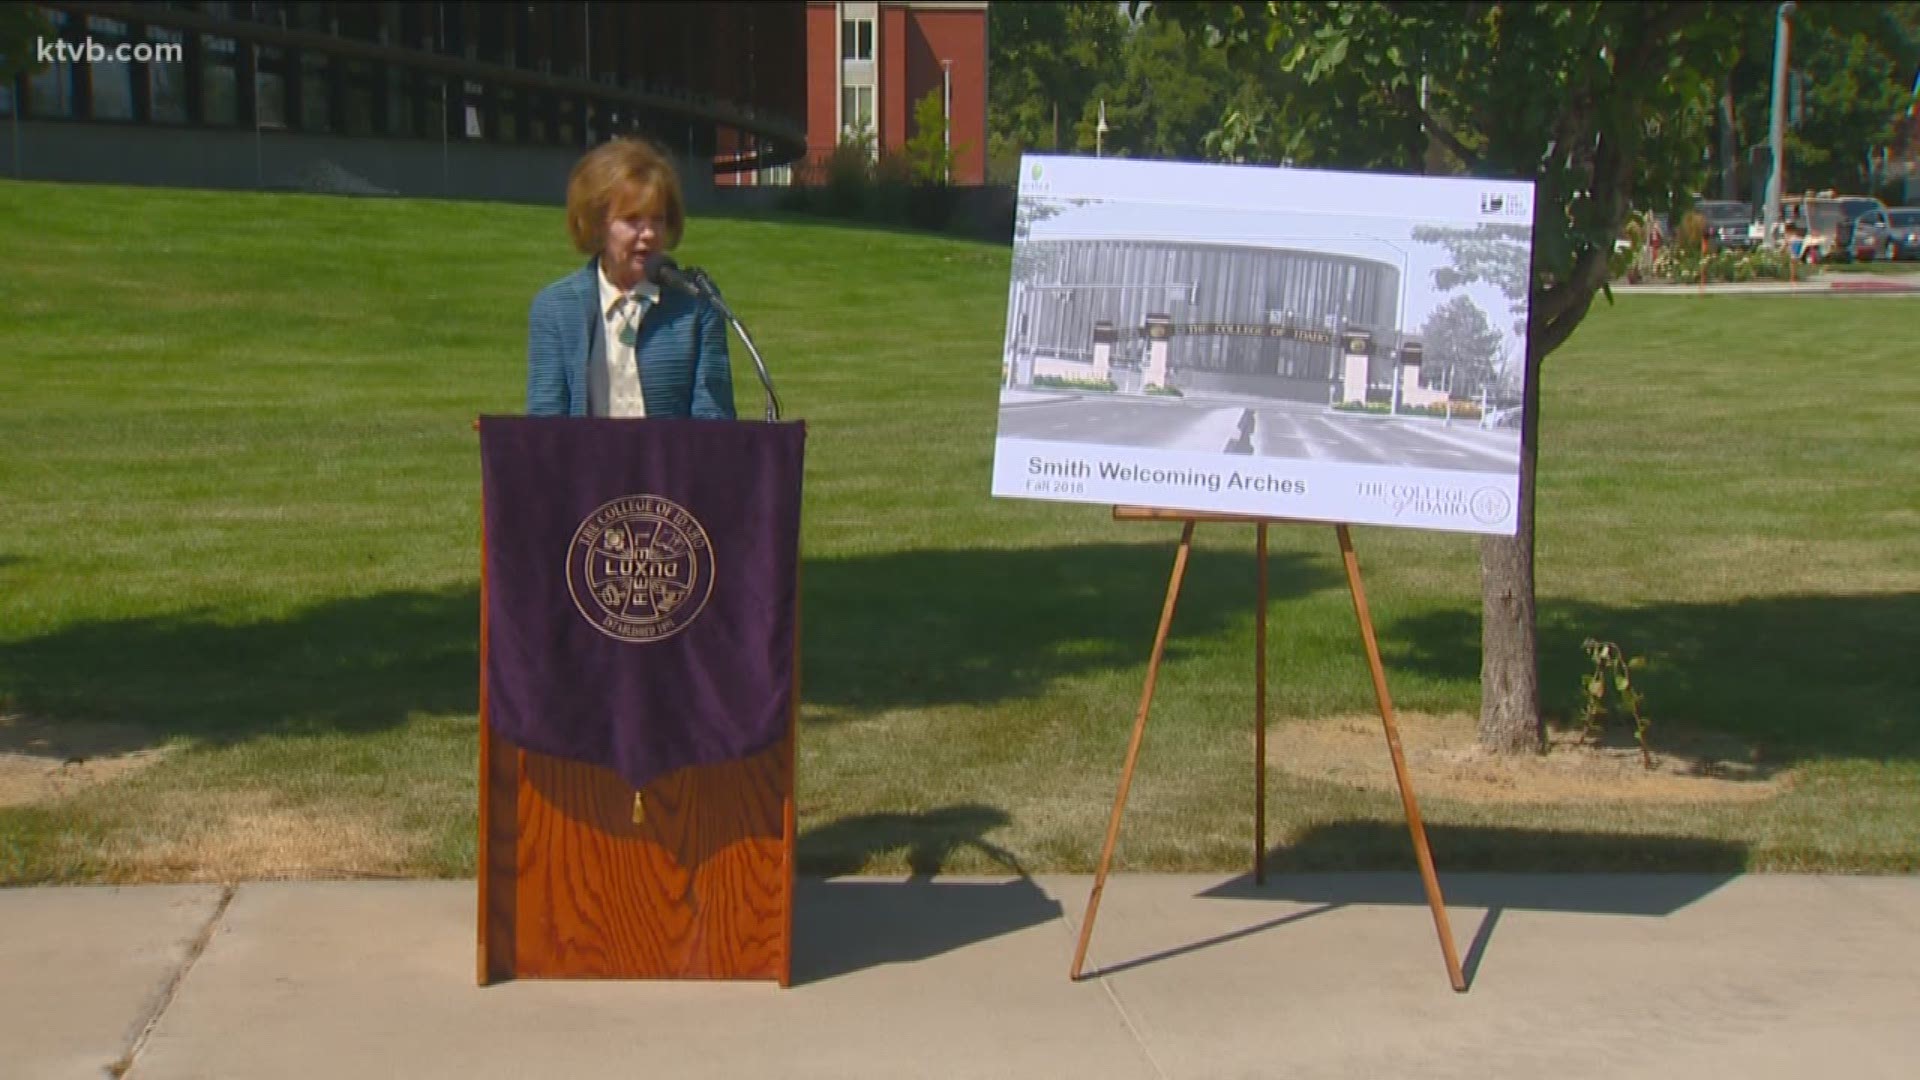 Mary Smith hopes the arches will set the campus apart from Caldwell Boulevard.